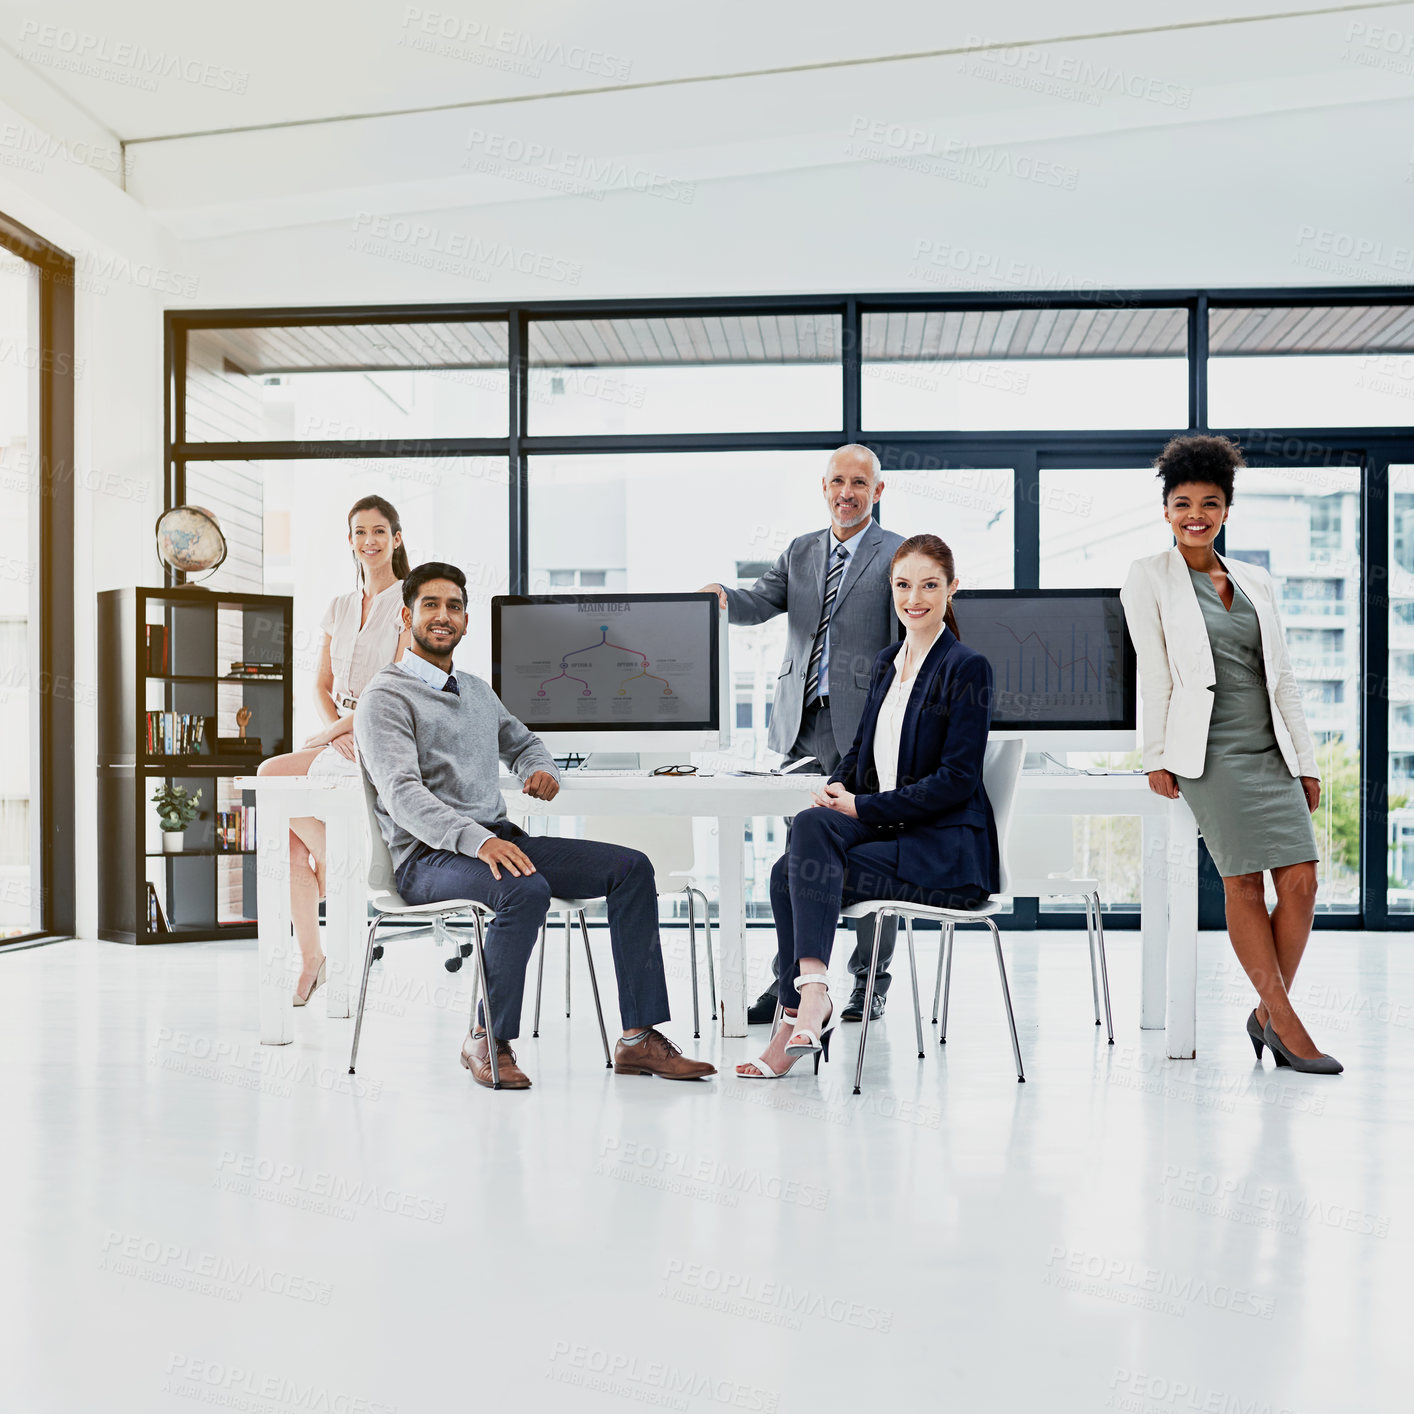 Buy stock photo Portrait of a group of businesspeople standing together